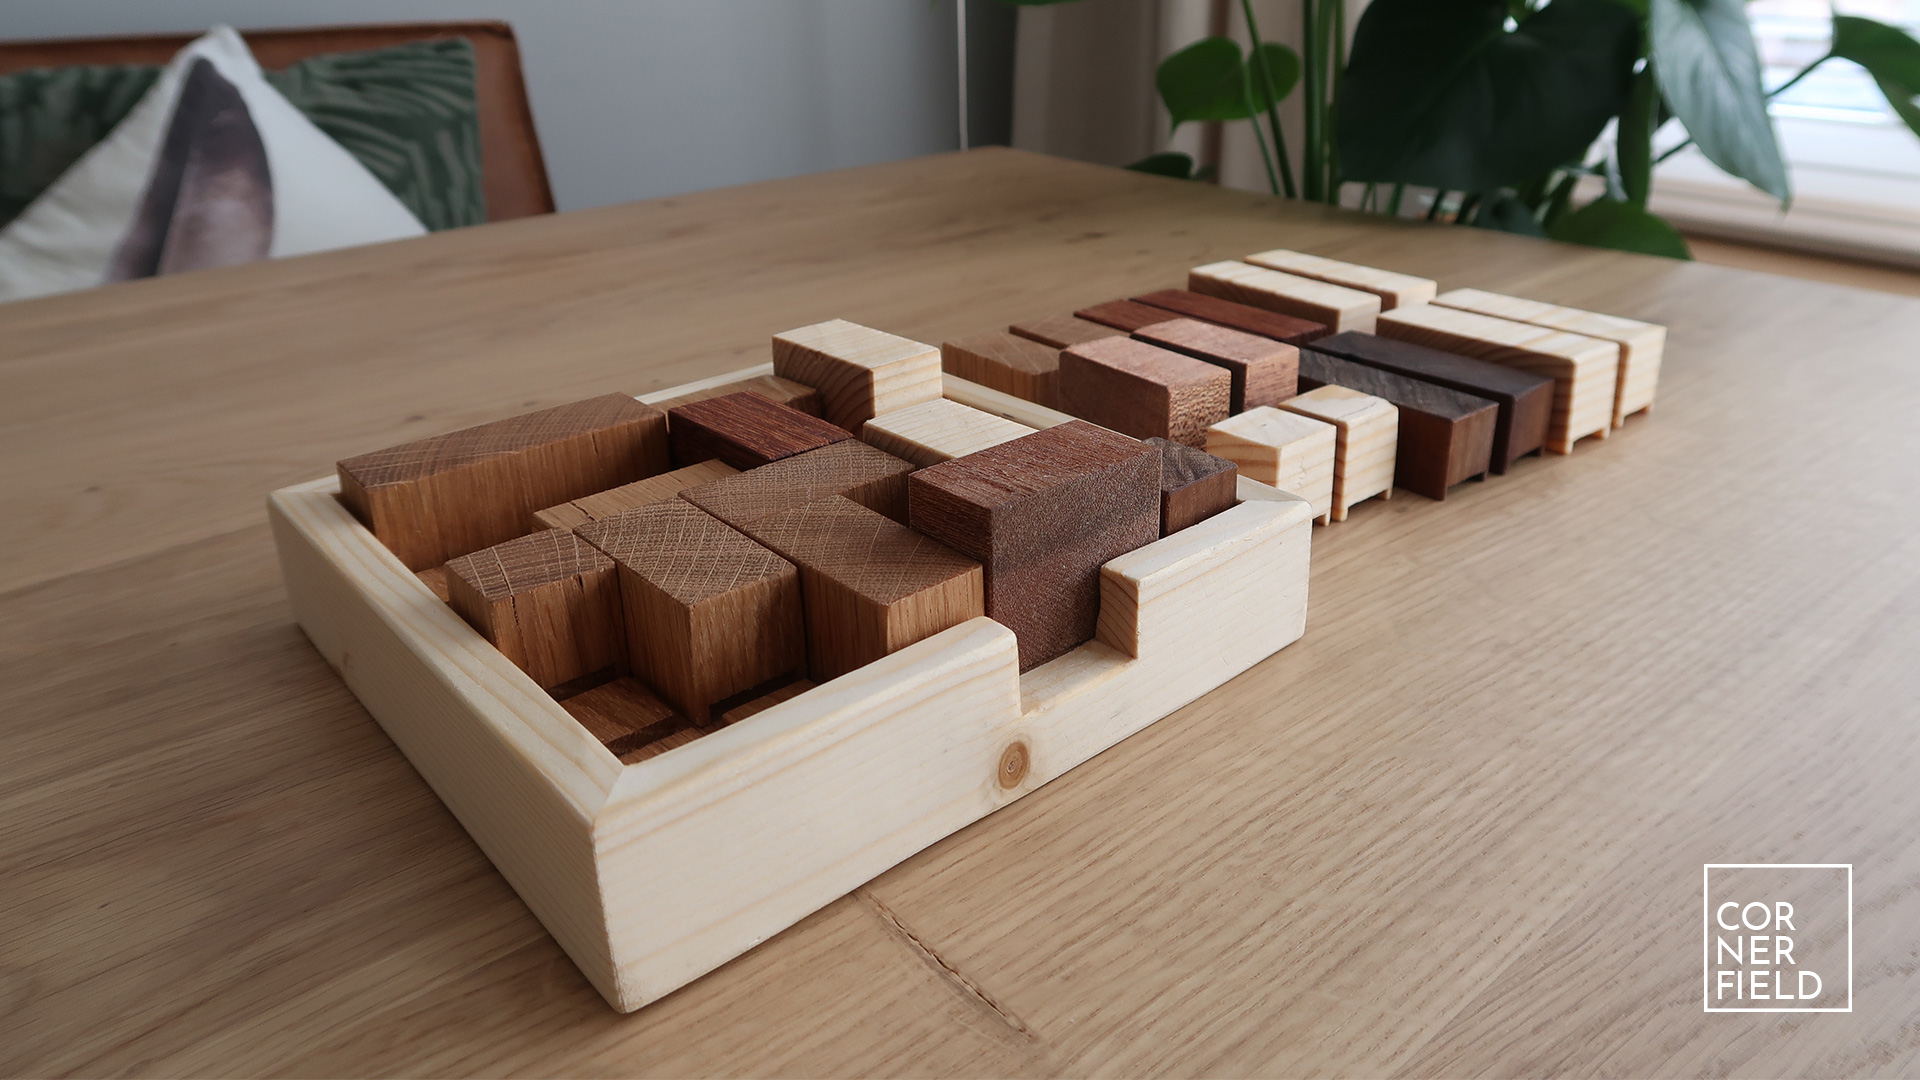 Wooden Puzzle - Fun project and DIY gift - Cornerfield Shop